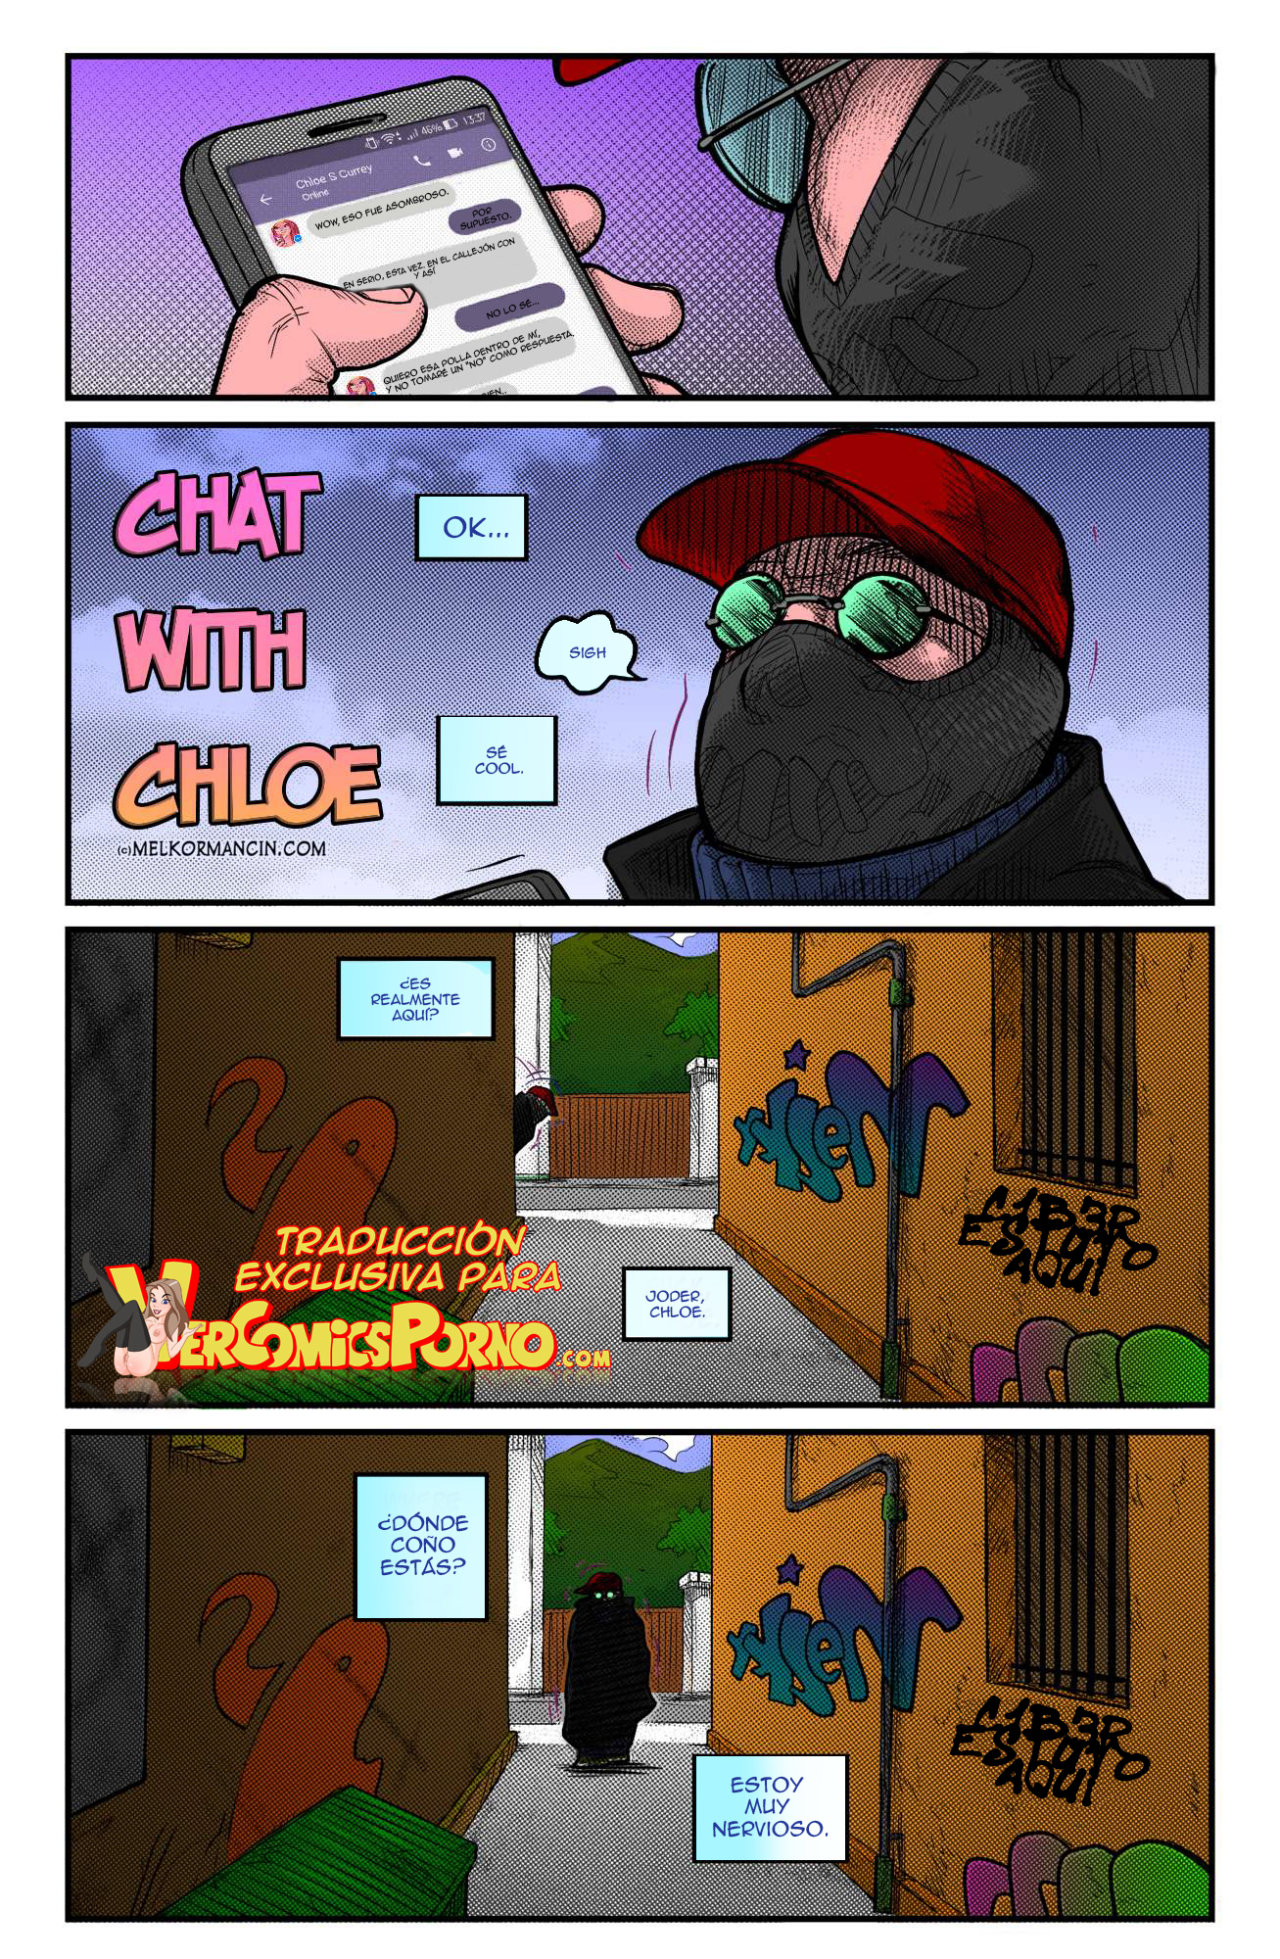 Chloe (A CHAT WITH CHLOE 2) - 0